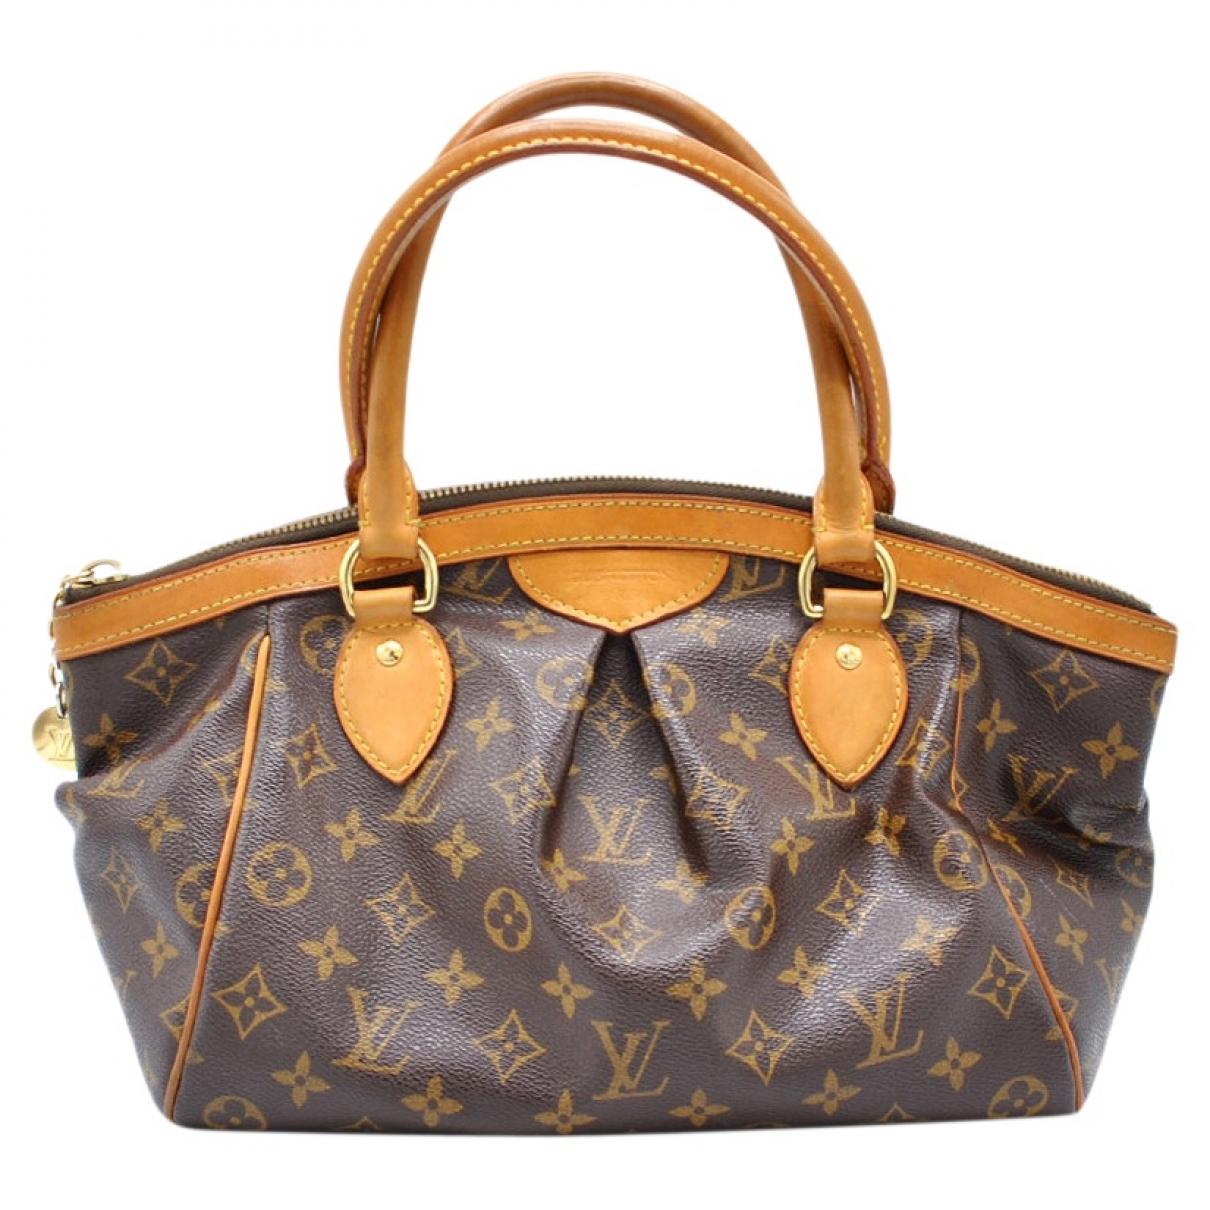 LOUIS VUITTON TIVOLI PM  Review and Comparison with the